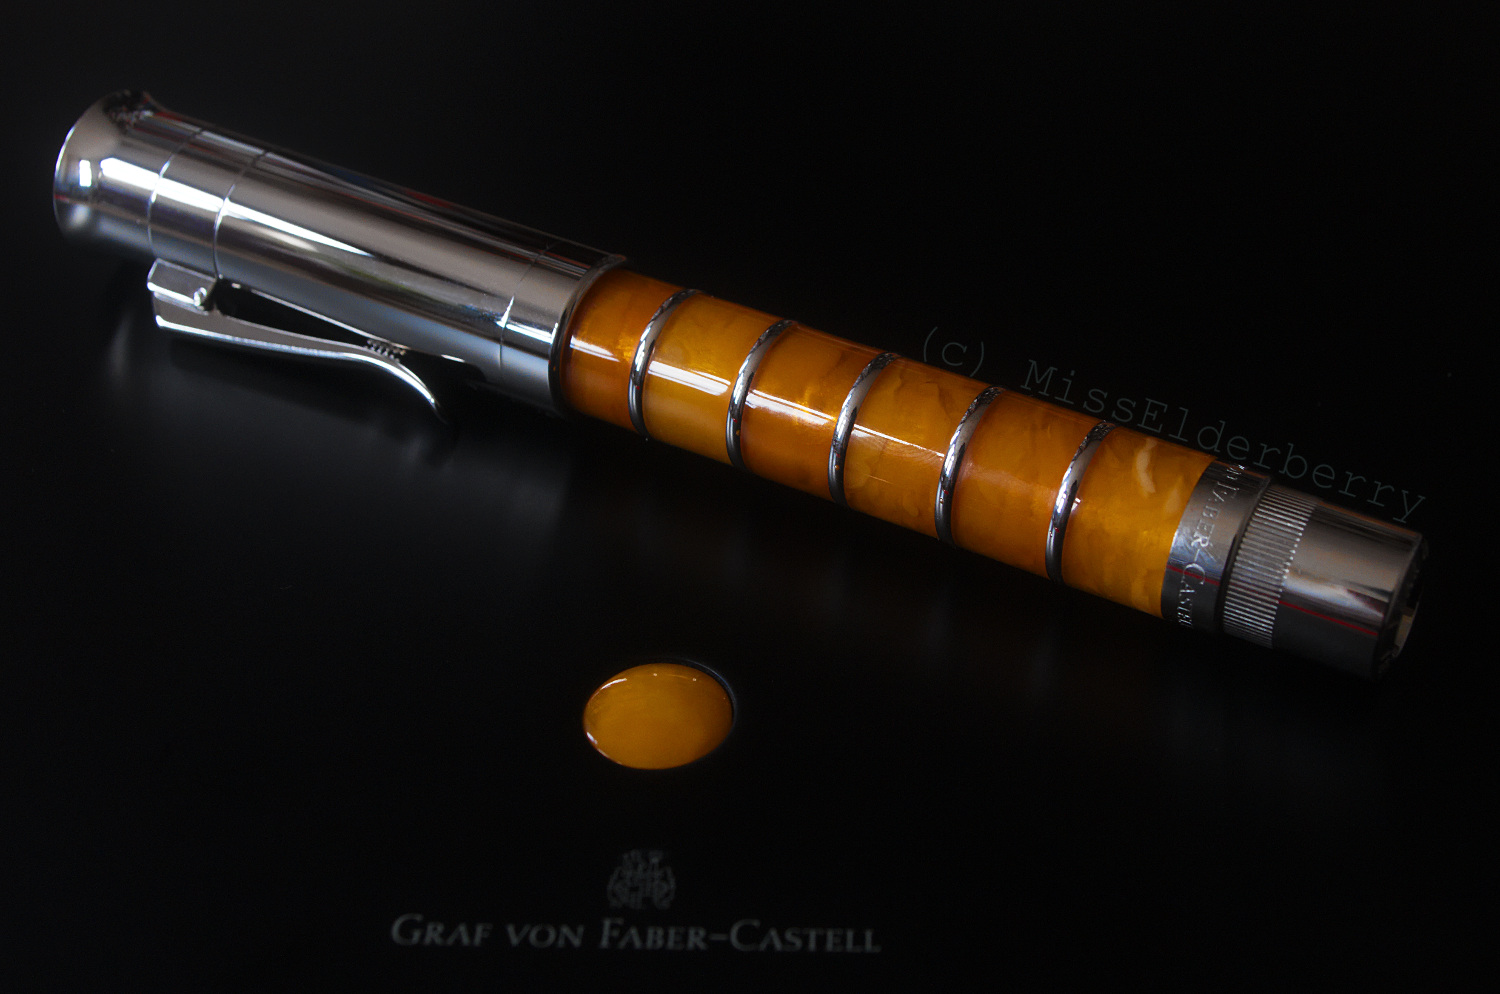 these beautiful pens Amber Graf von Faber Castell  s Pen 